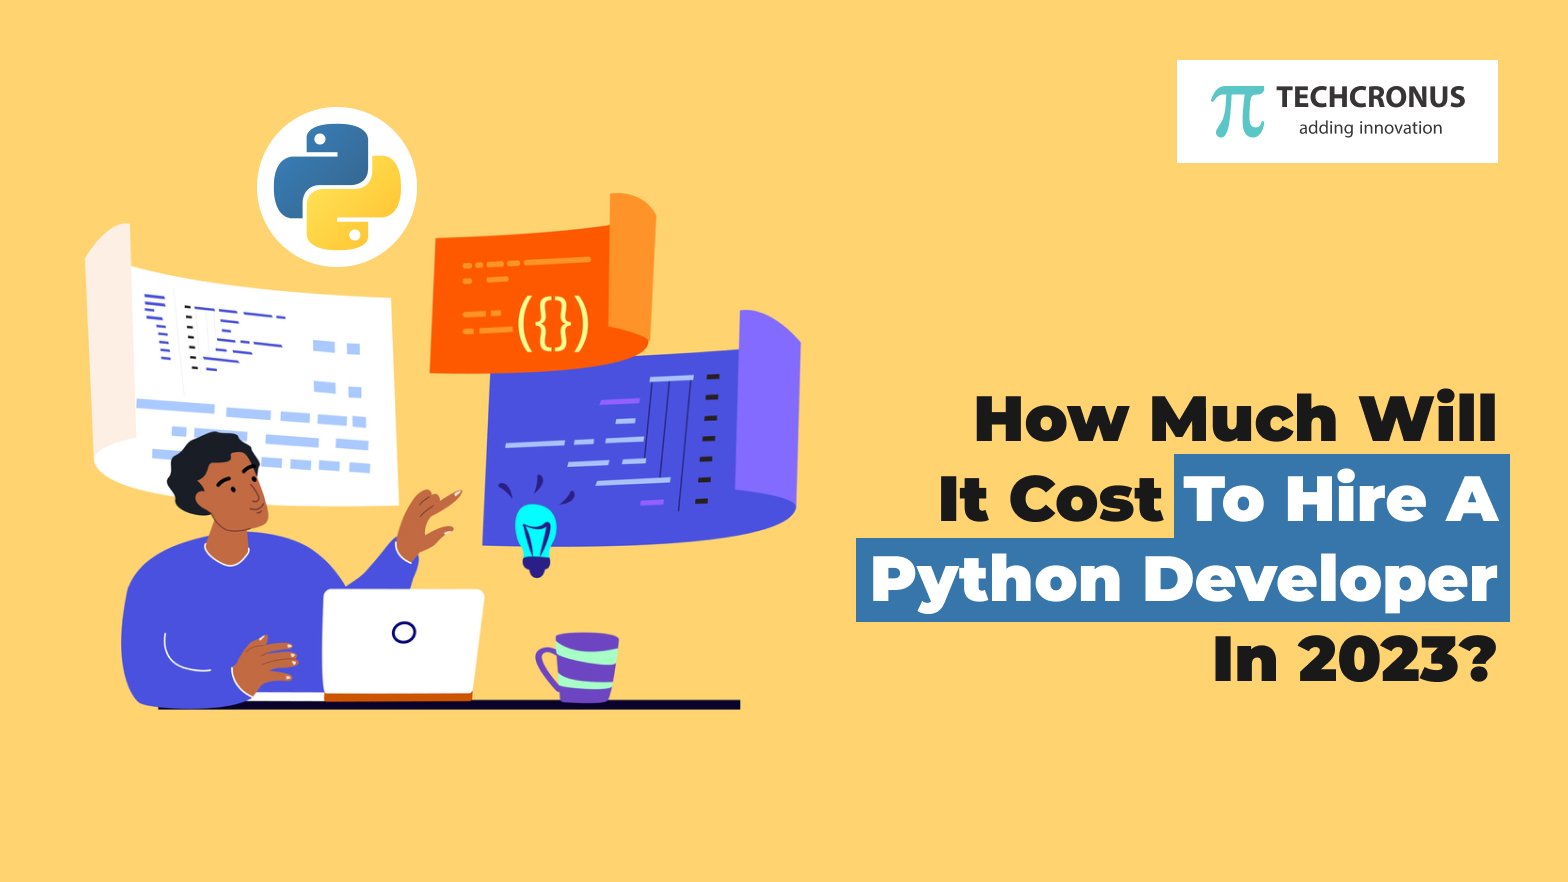 cost to hire a Python developer in 2023?